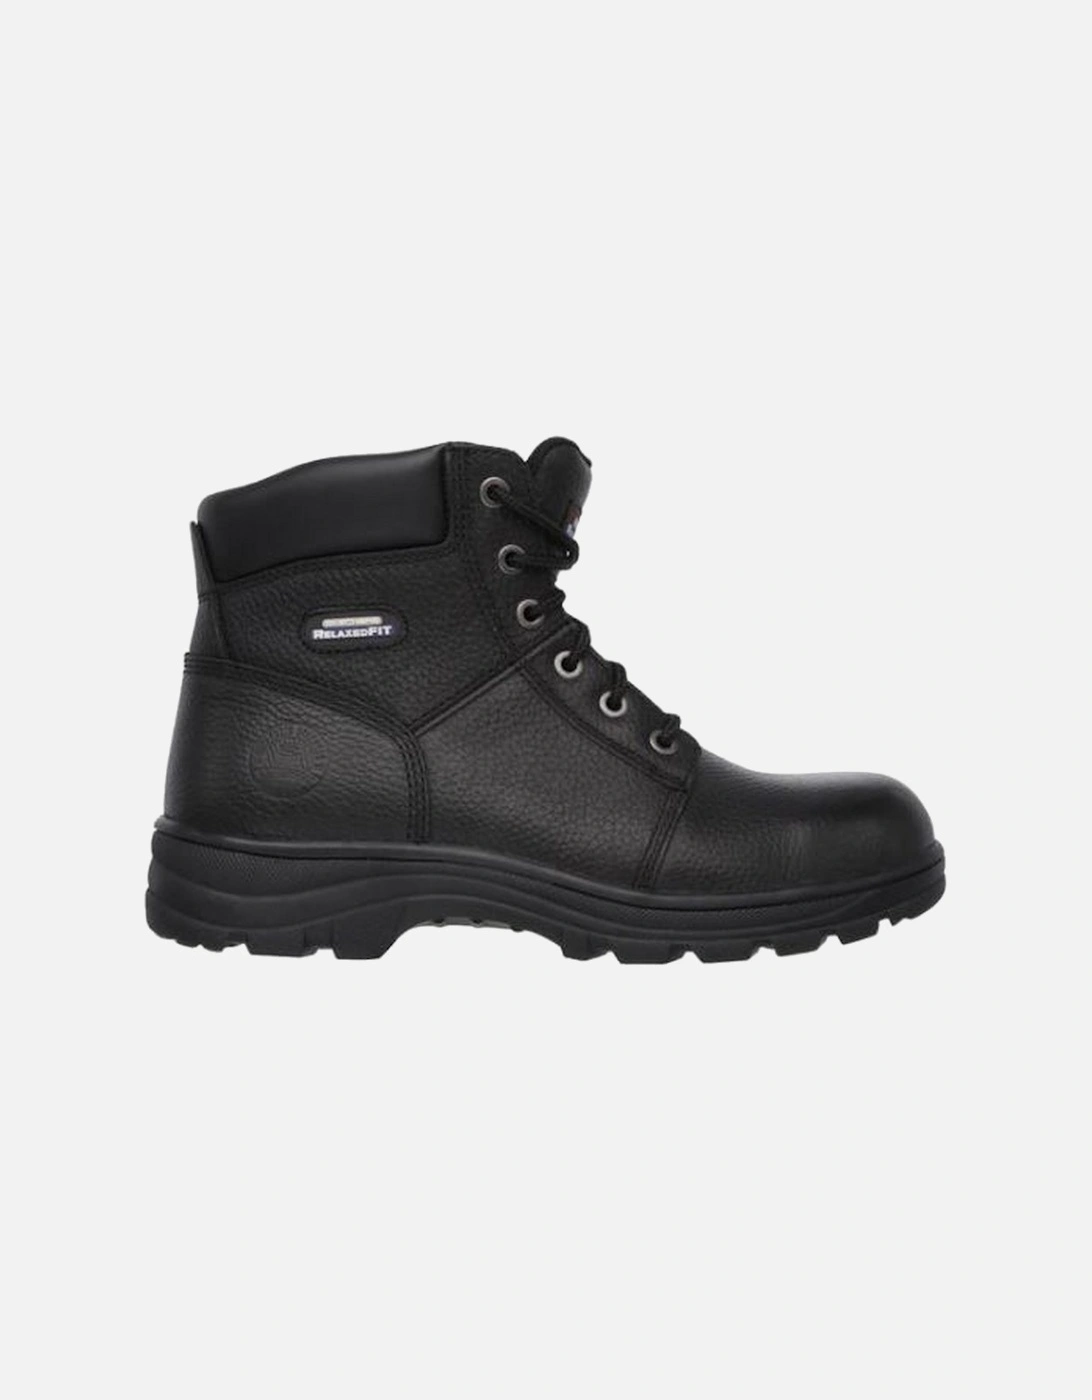 Mens Workshire Safety Boots